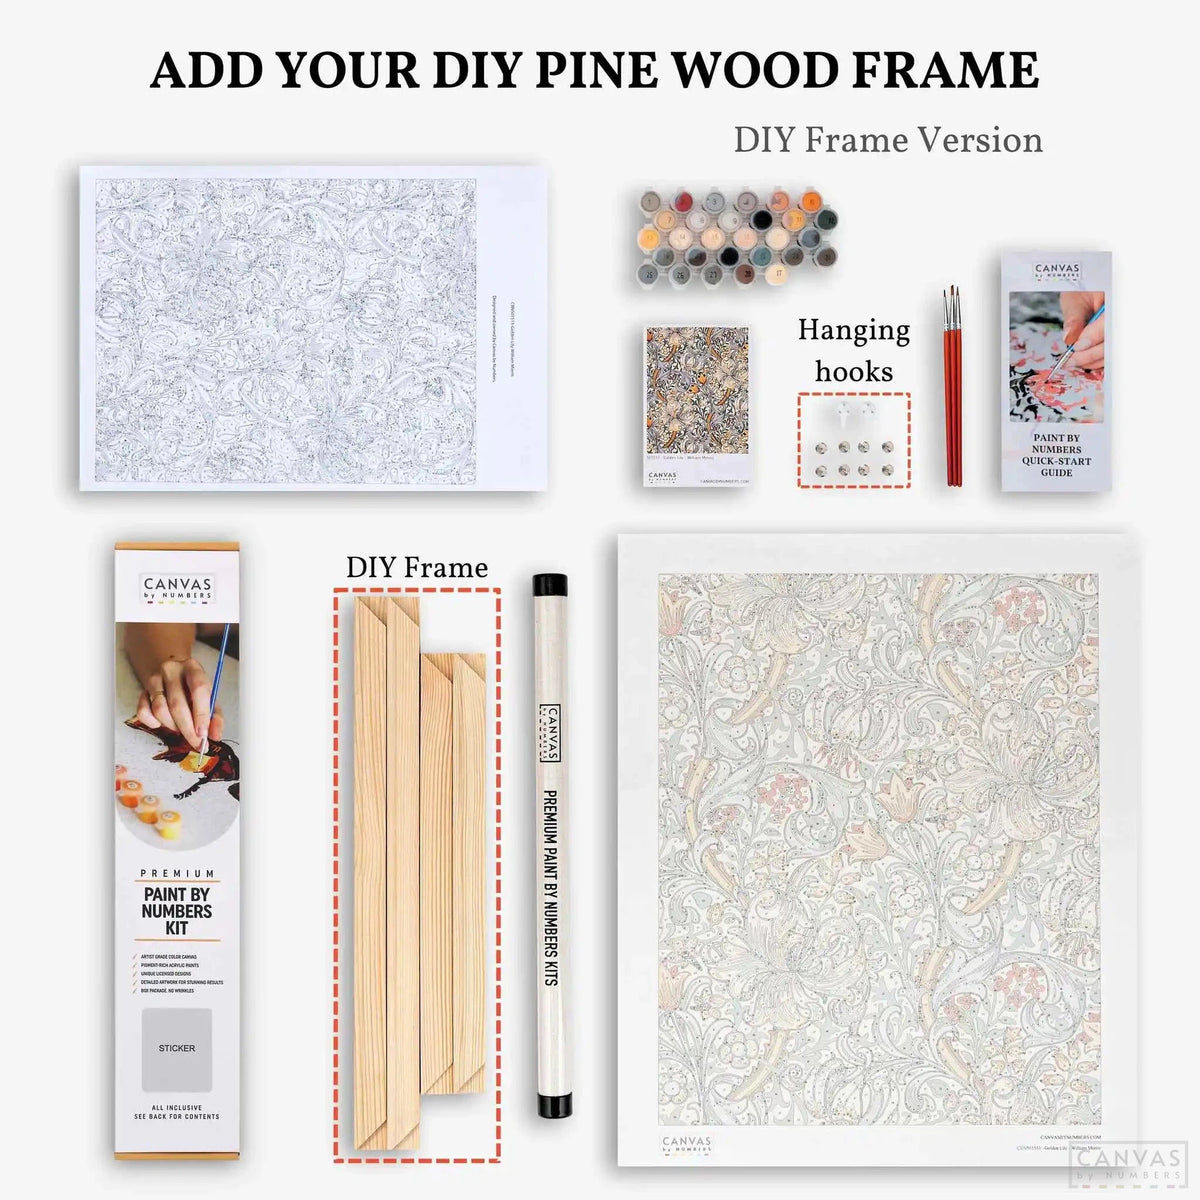 Almond Blossom - Paint by Numbers-The Almond Blossom paint by numbers by Van Gogh is one of the most emblematic painting kits you can buy. Get yours and enjoy a creative experience.-Canvas by Numbers